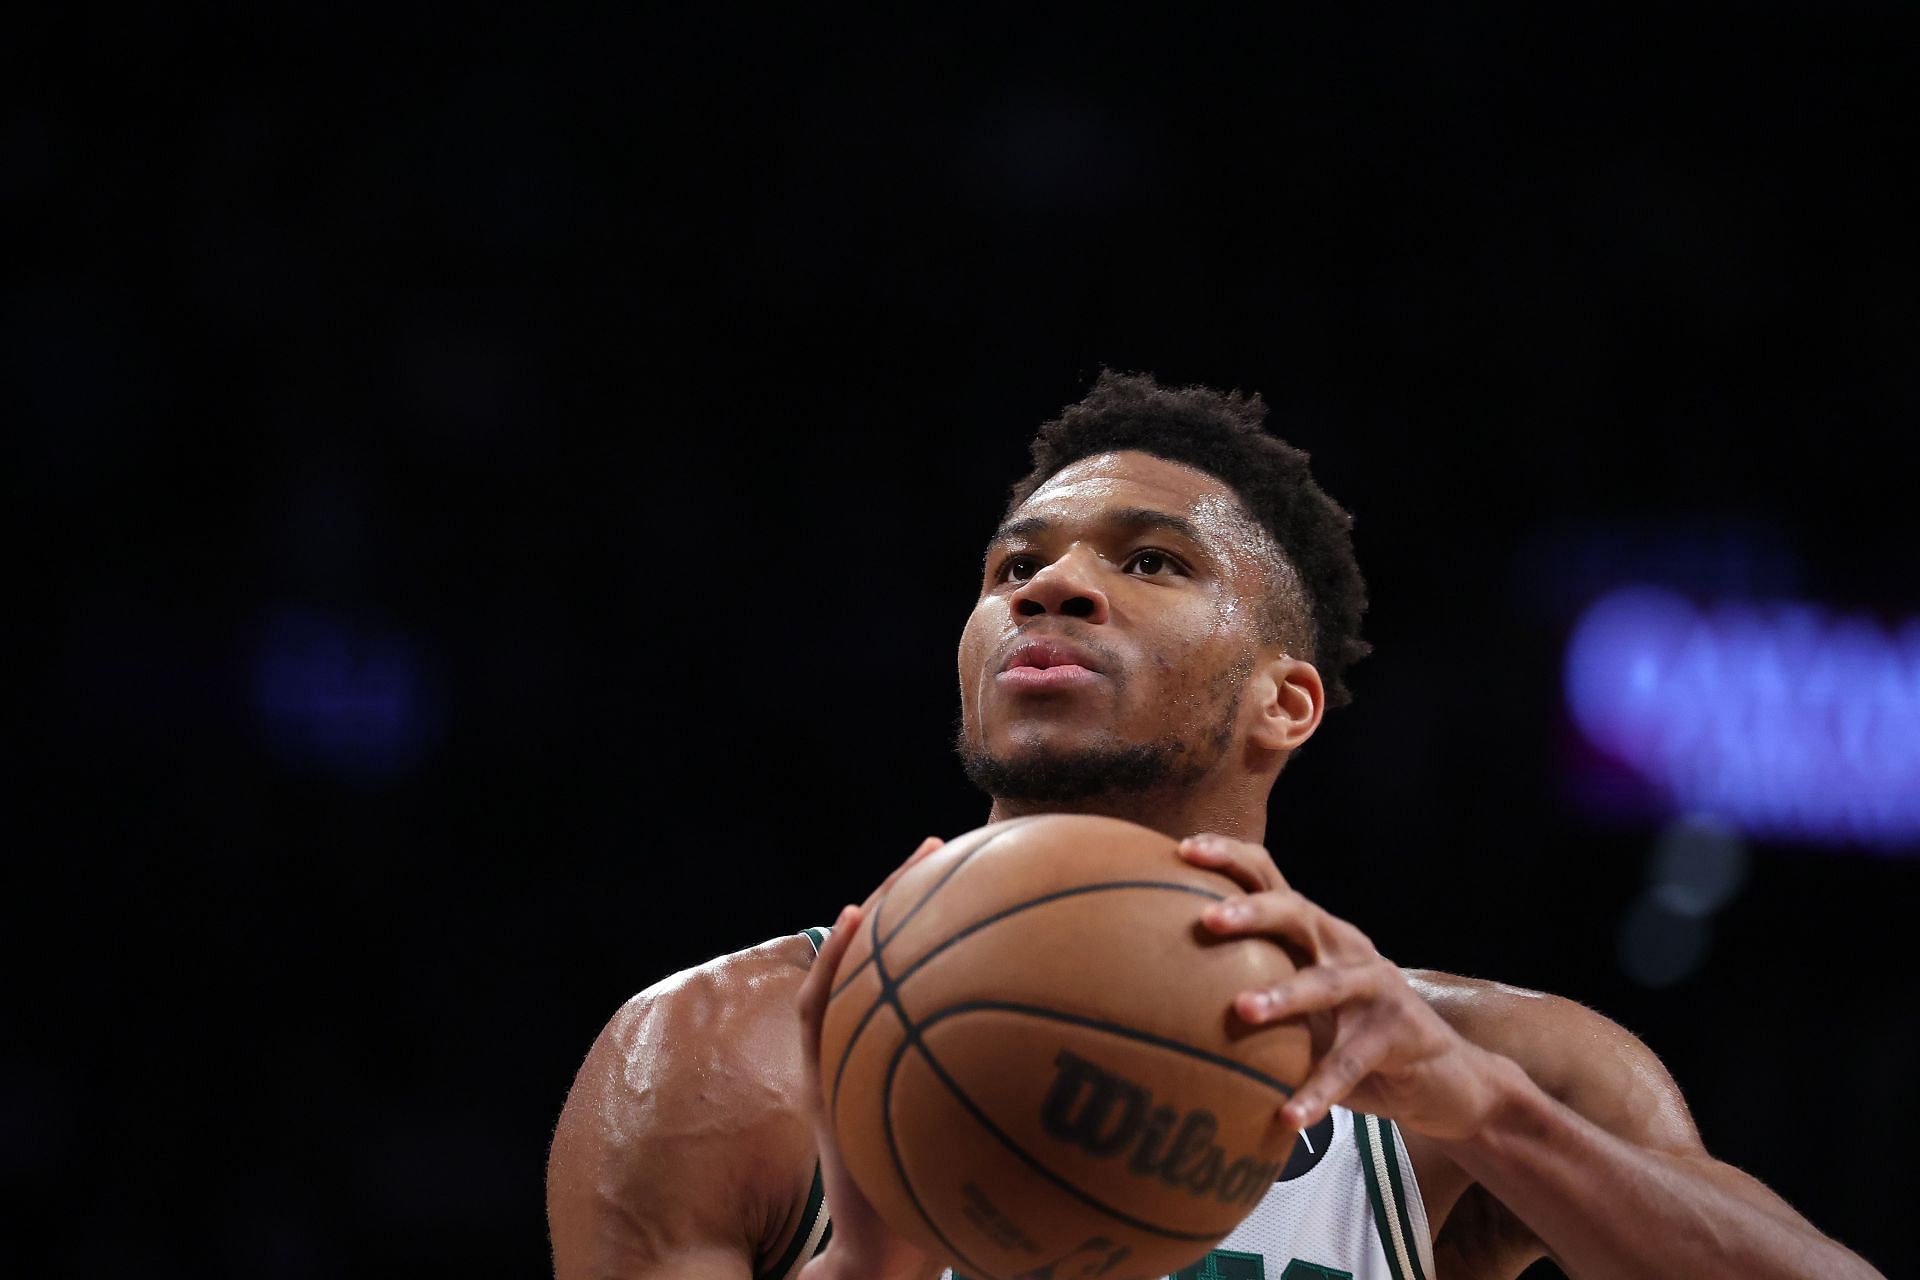 Giannis Antetokounmpo #34 of the Milwaukee Bucks takes a foul shot against the Brooklyn Nets during their game at Barclays Center on March 31, 2022 in New York City.